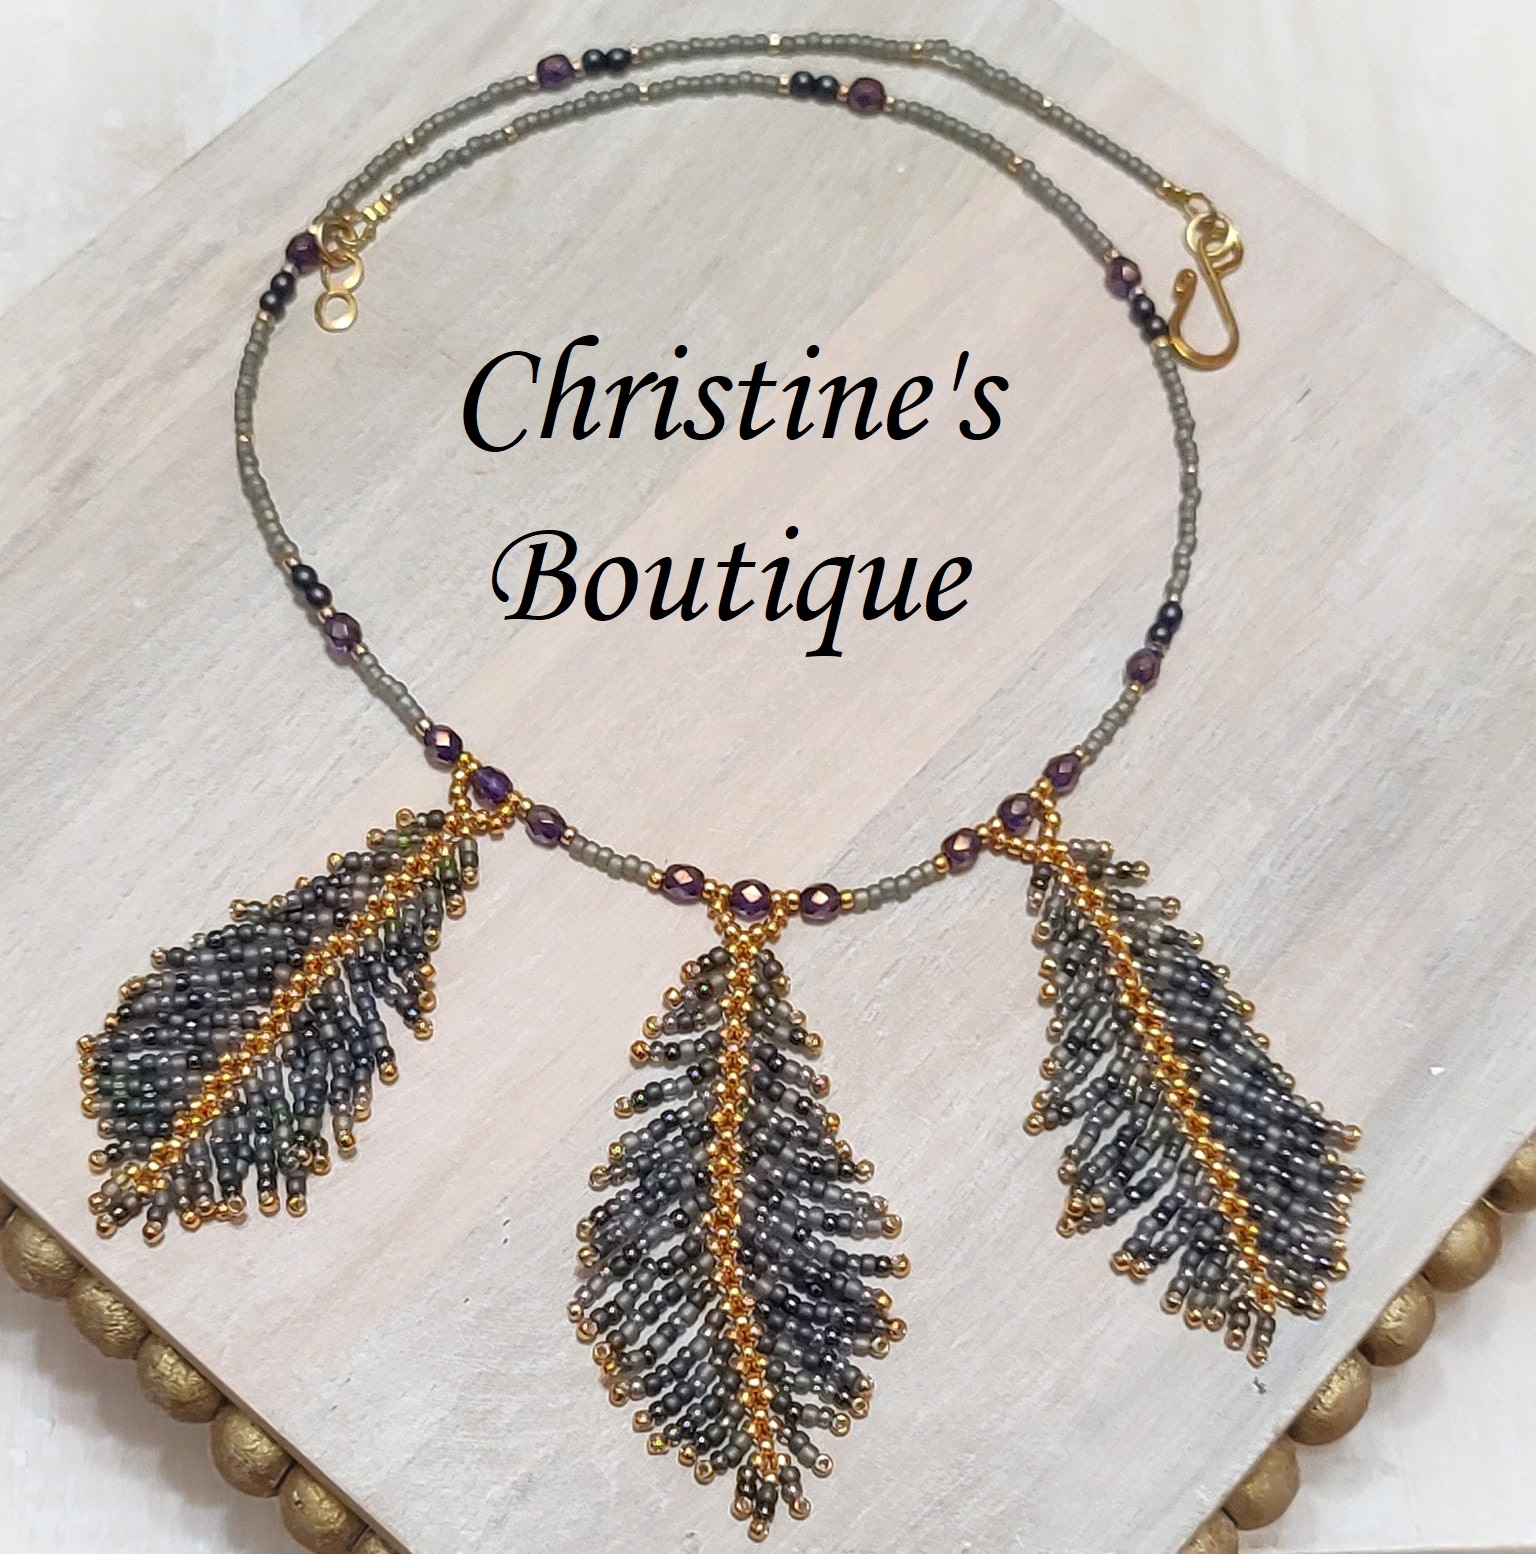 Feather necklace, handcrafted miyuki glass and crystals